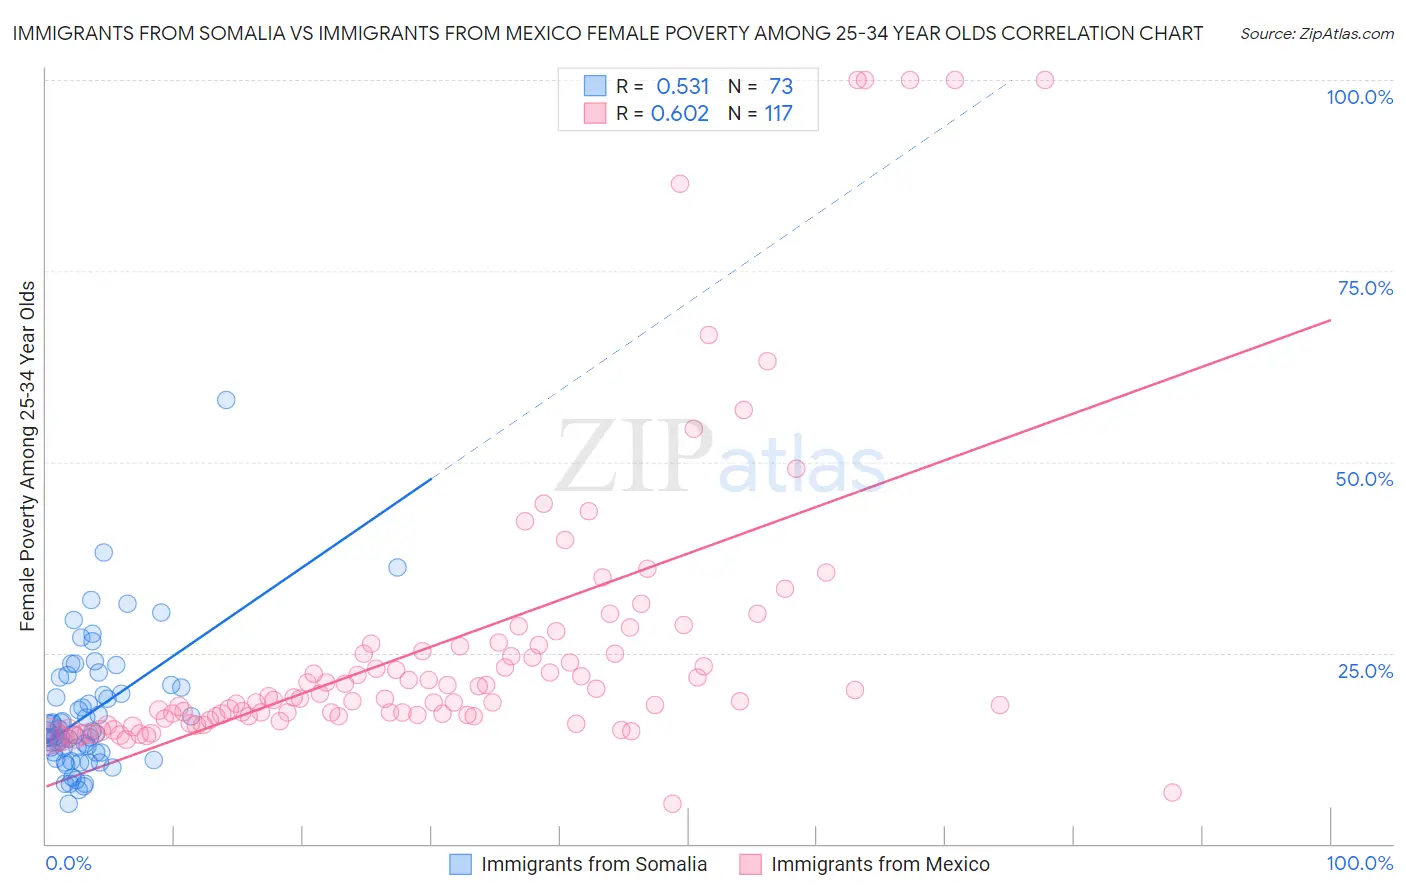 Immigrants from Somalia vs Immigrants from Mexico Female Poverty Among 25-34 Year Olds